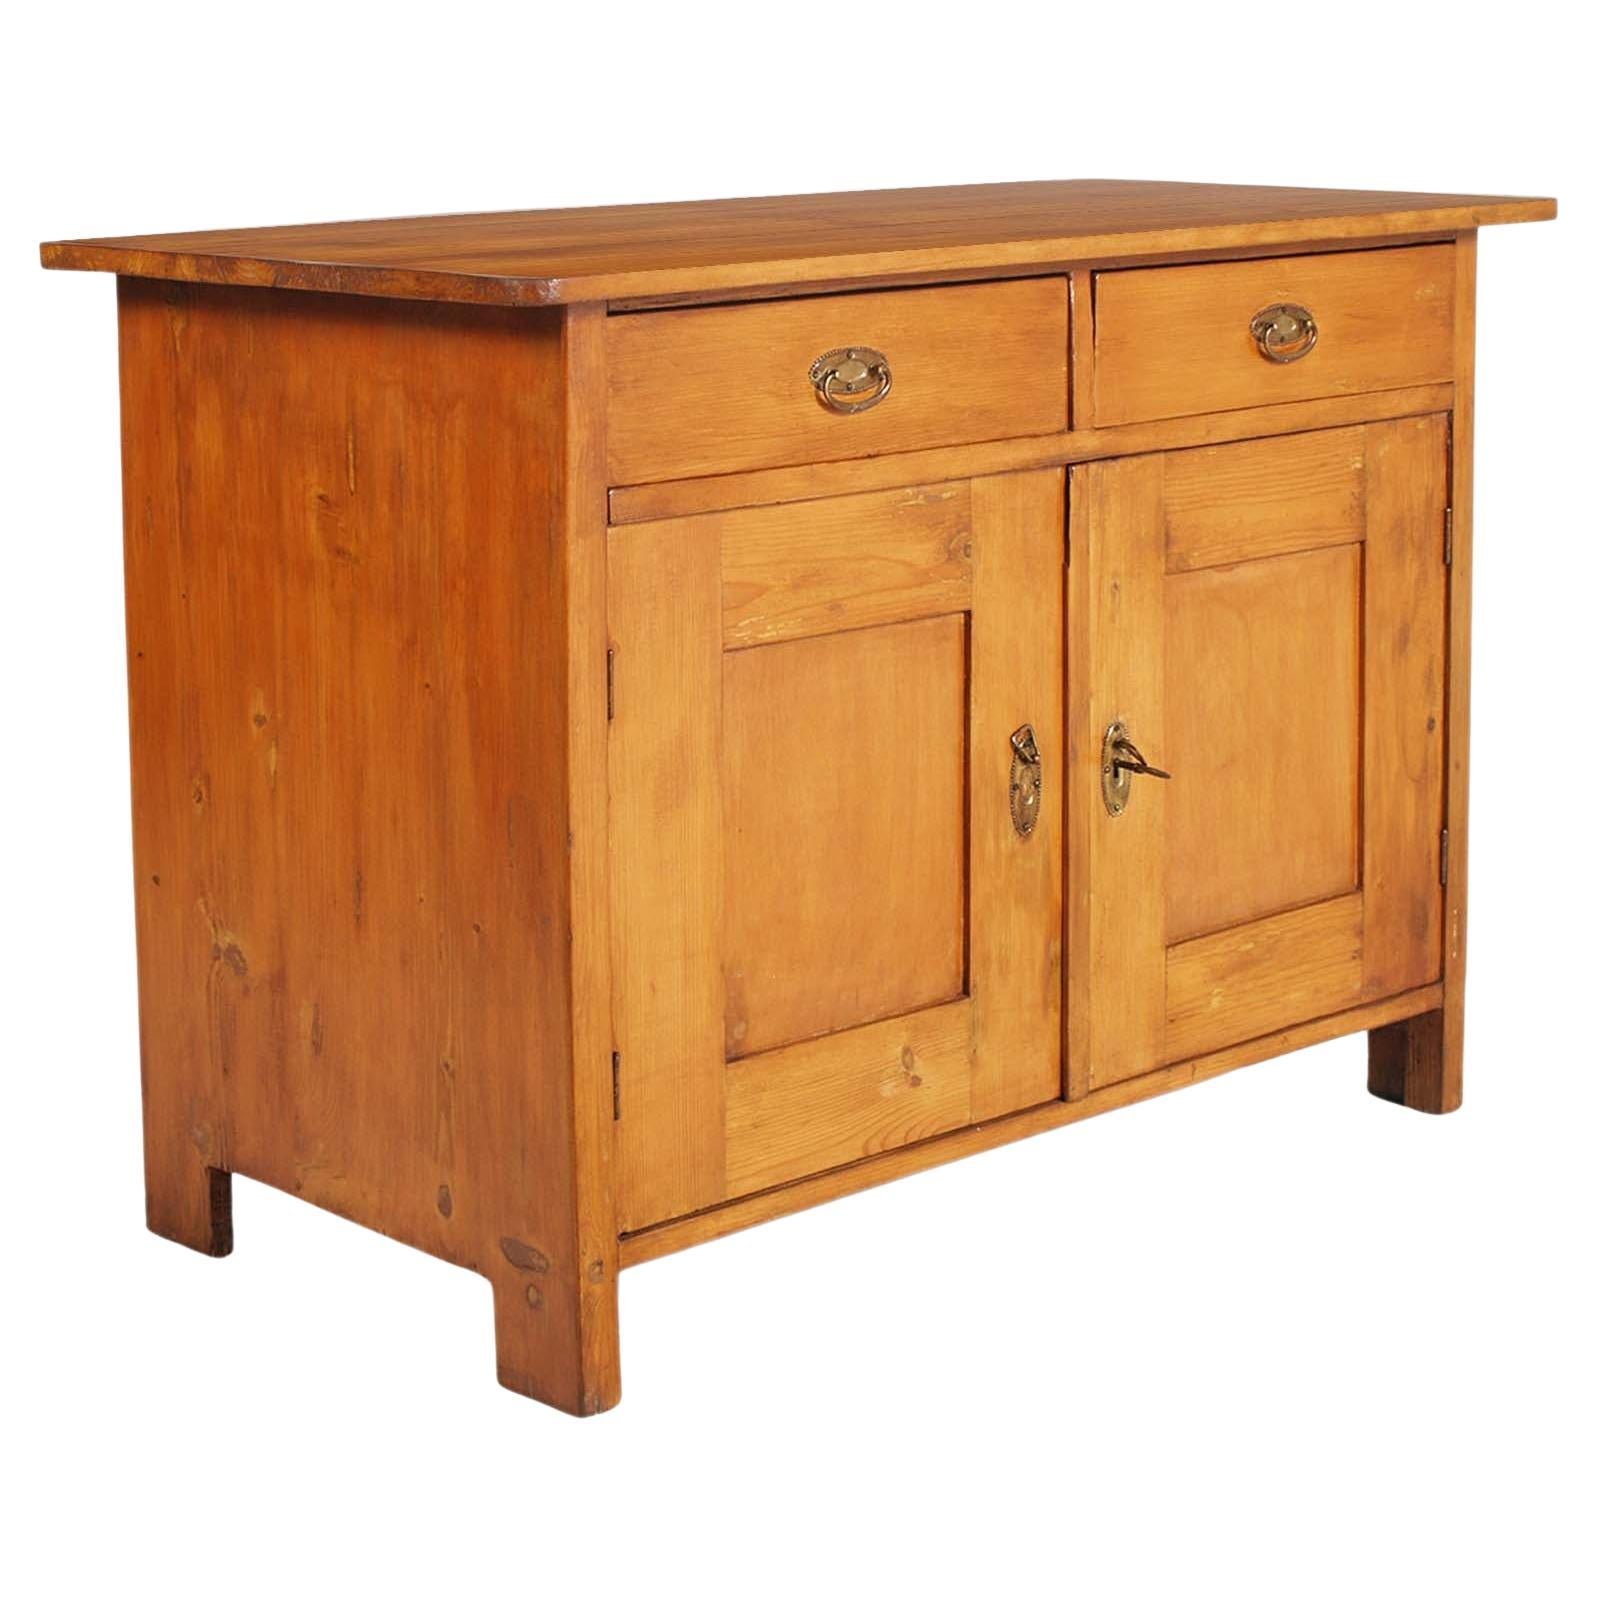 Tyrolean Late 18th Century Credenza Sideboard Massive Chestnut Wood Wax Polished For Sale